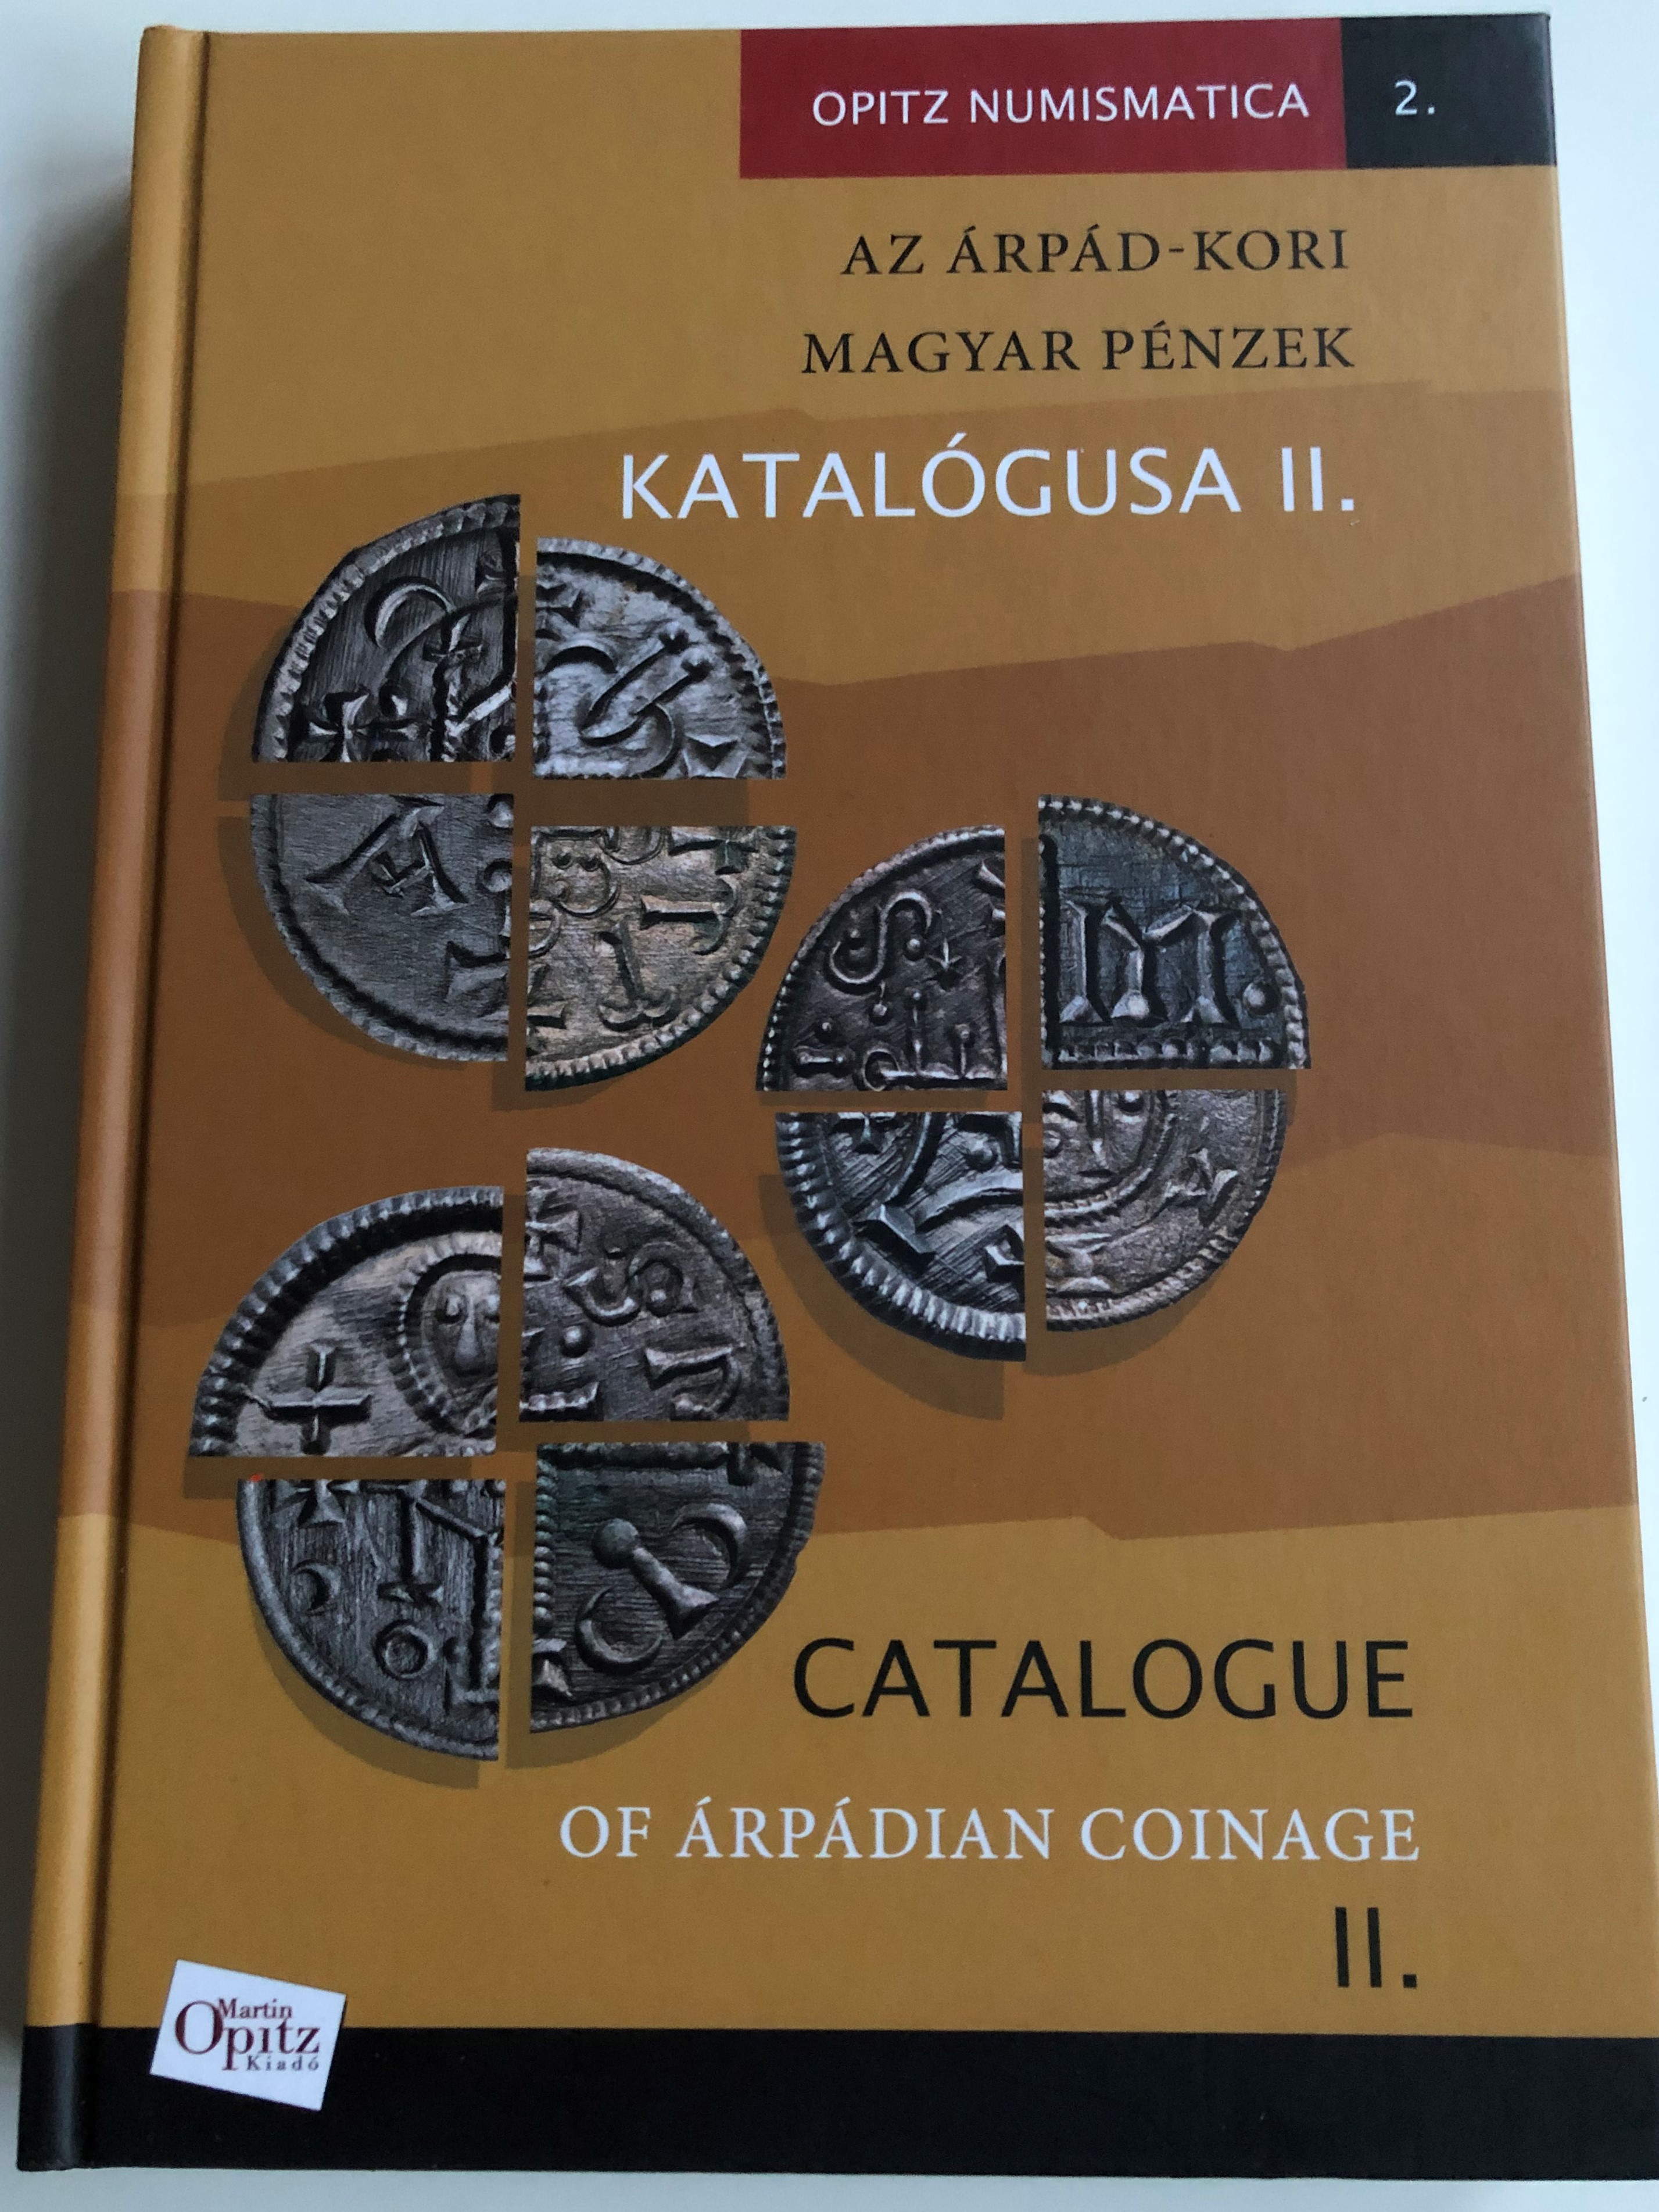 catalogue-of-rp-dian-coinage-ii.-by-t-th-csaba-kiss-j-zsef-g-za-1.jpg